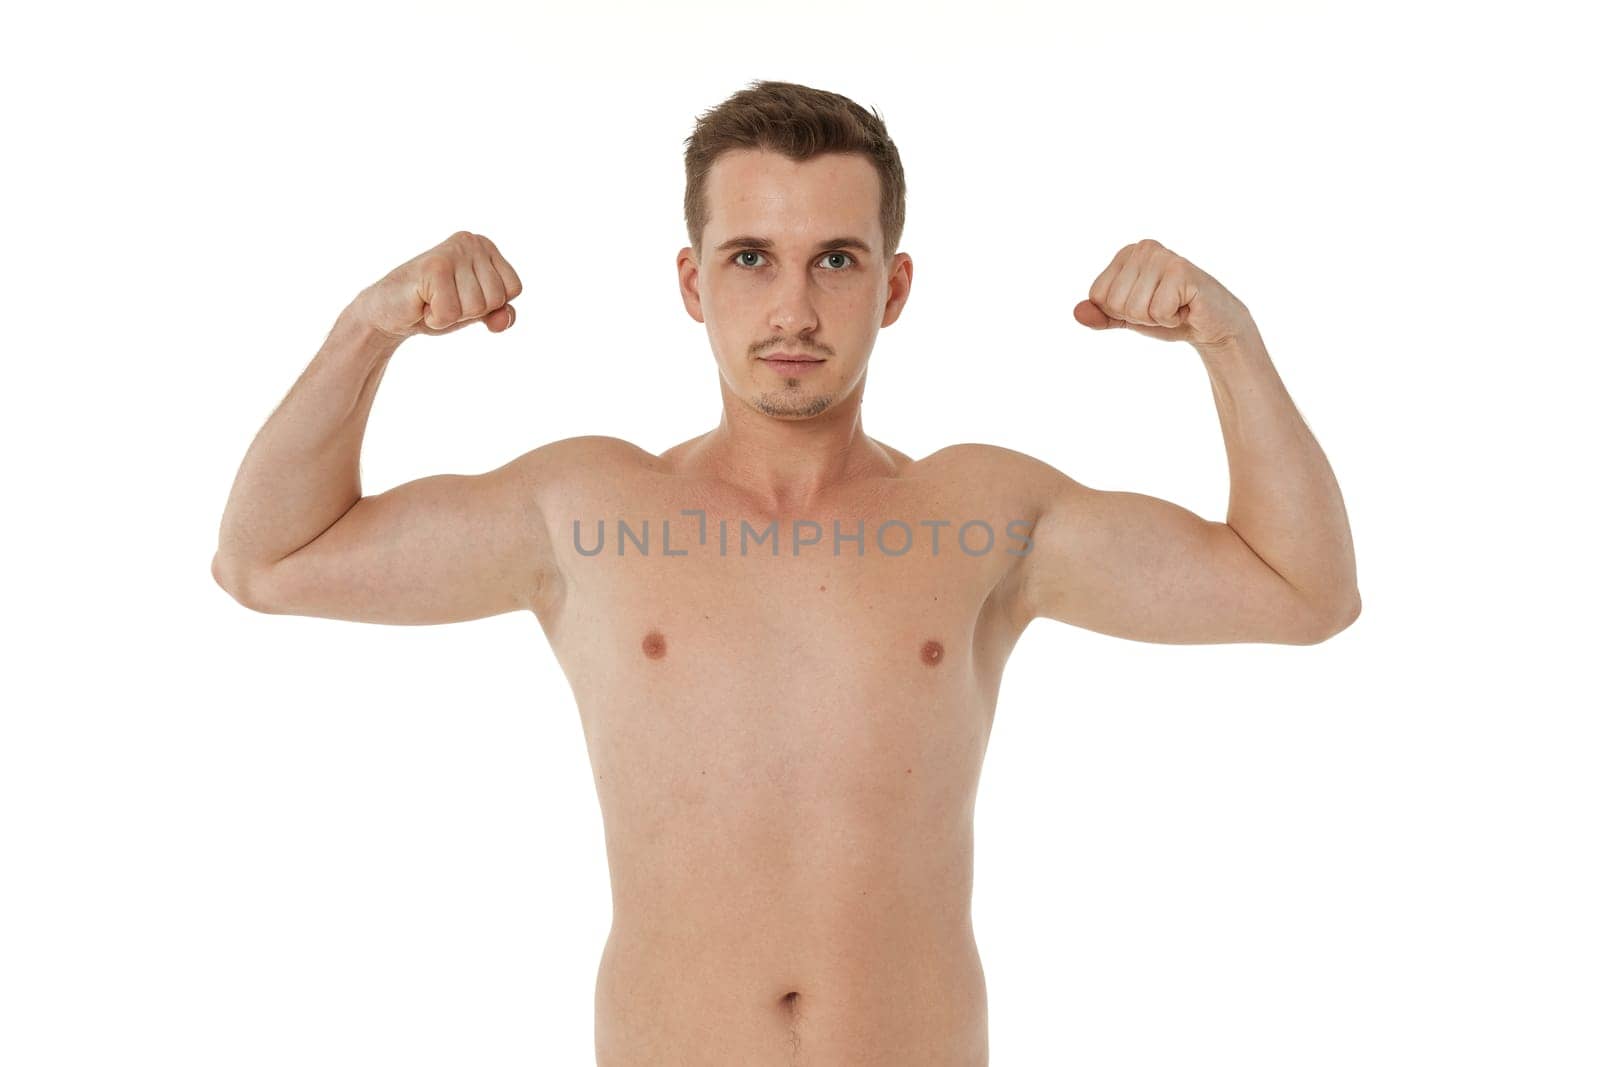 young man showing his bicep over white background